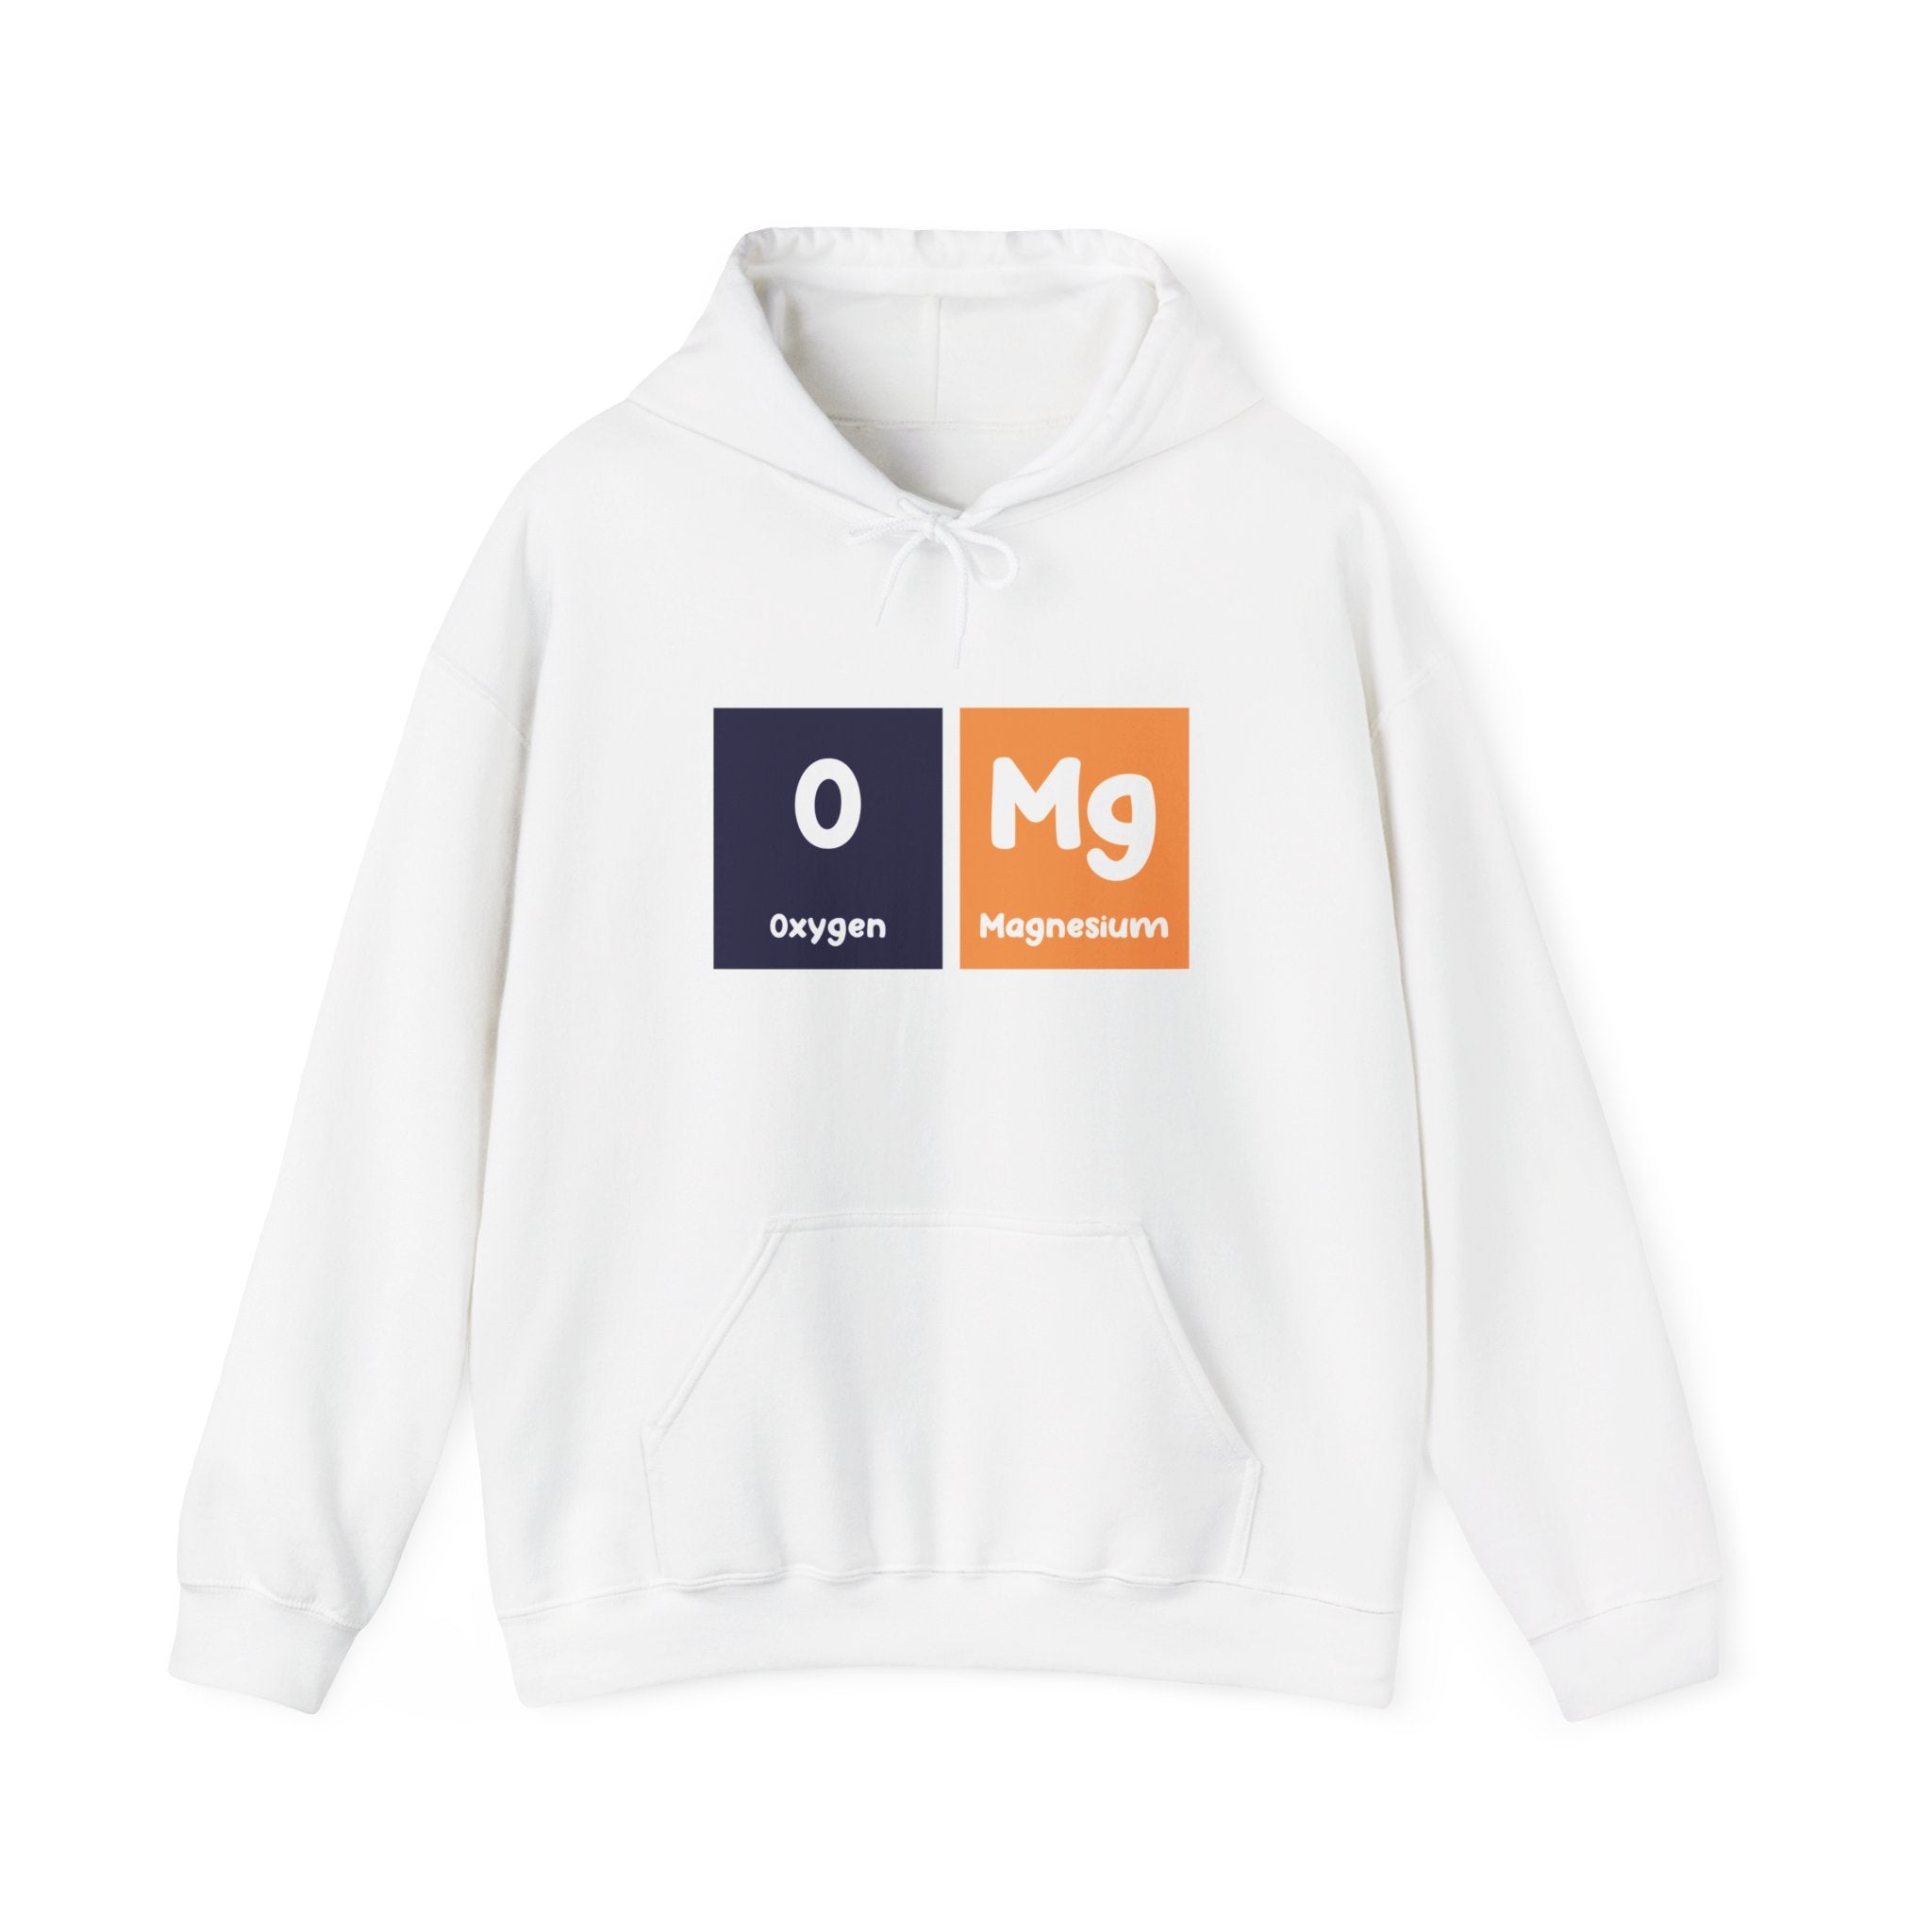 A white O-Mg - Hooded Sweatshirt with a design featuring "O" for Oxygen and "Mg" for Magnesium in periodic table style blocks on the front, offering both comfort and fashion.